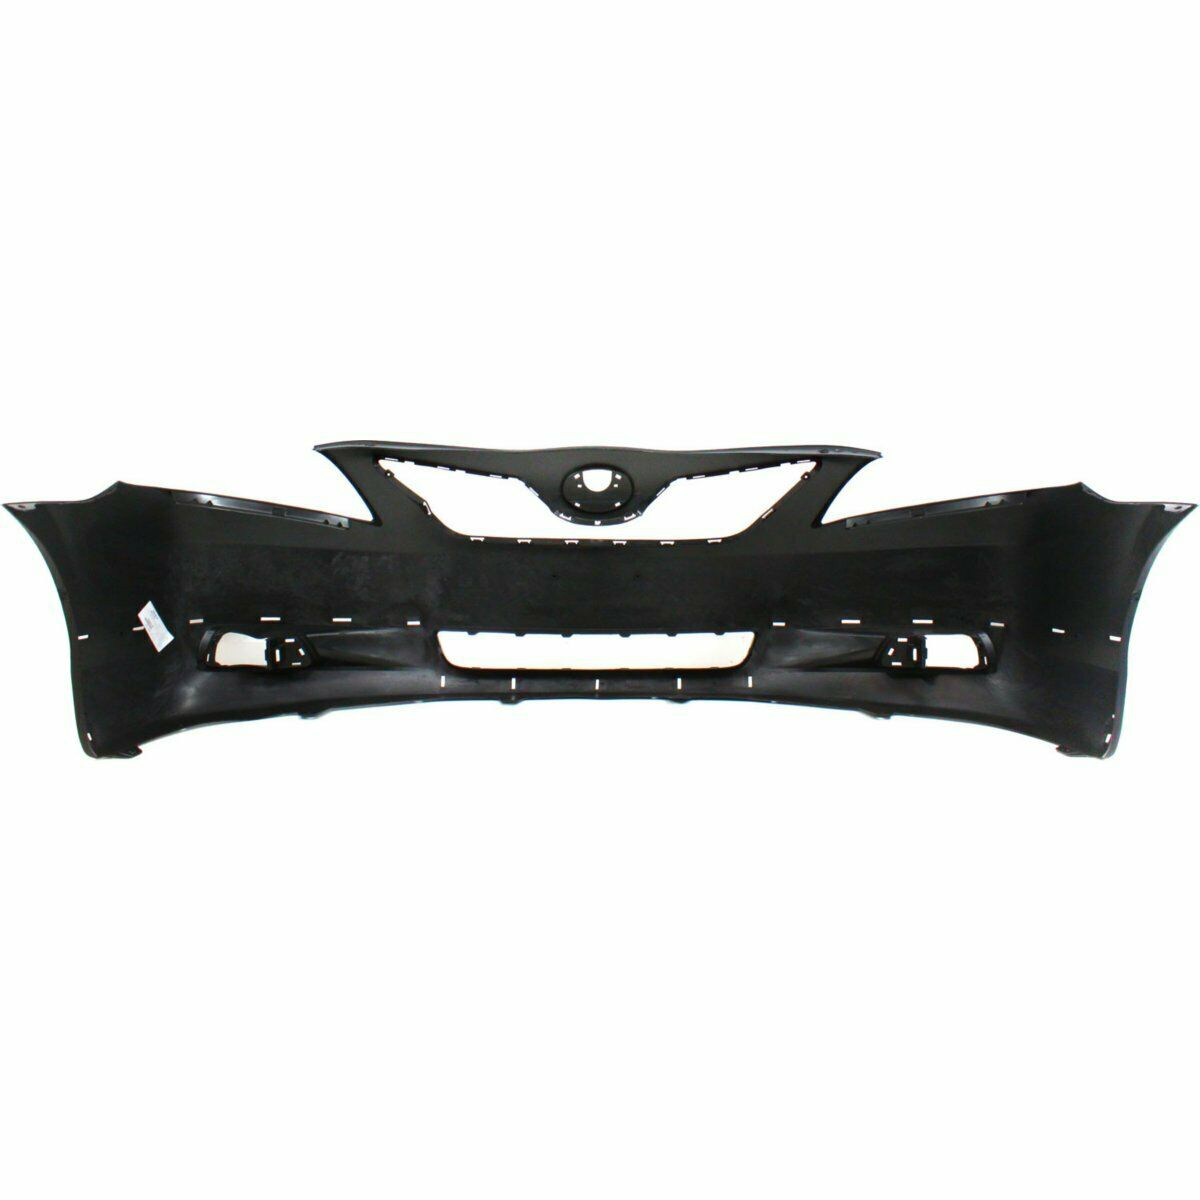 2007-2009 Toyota Camry SE Front Bumper Painted to Match